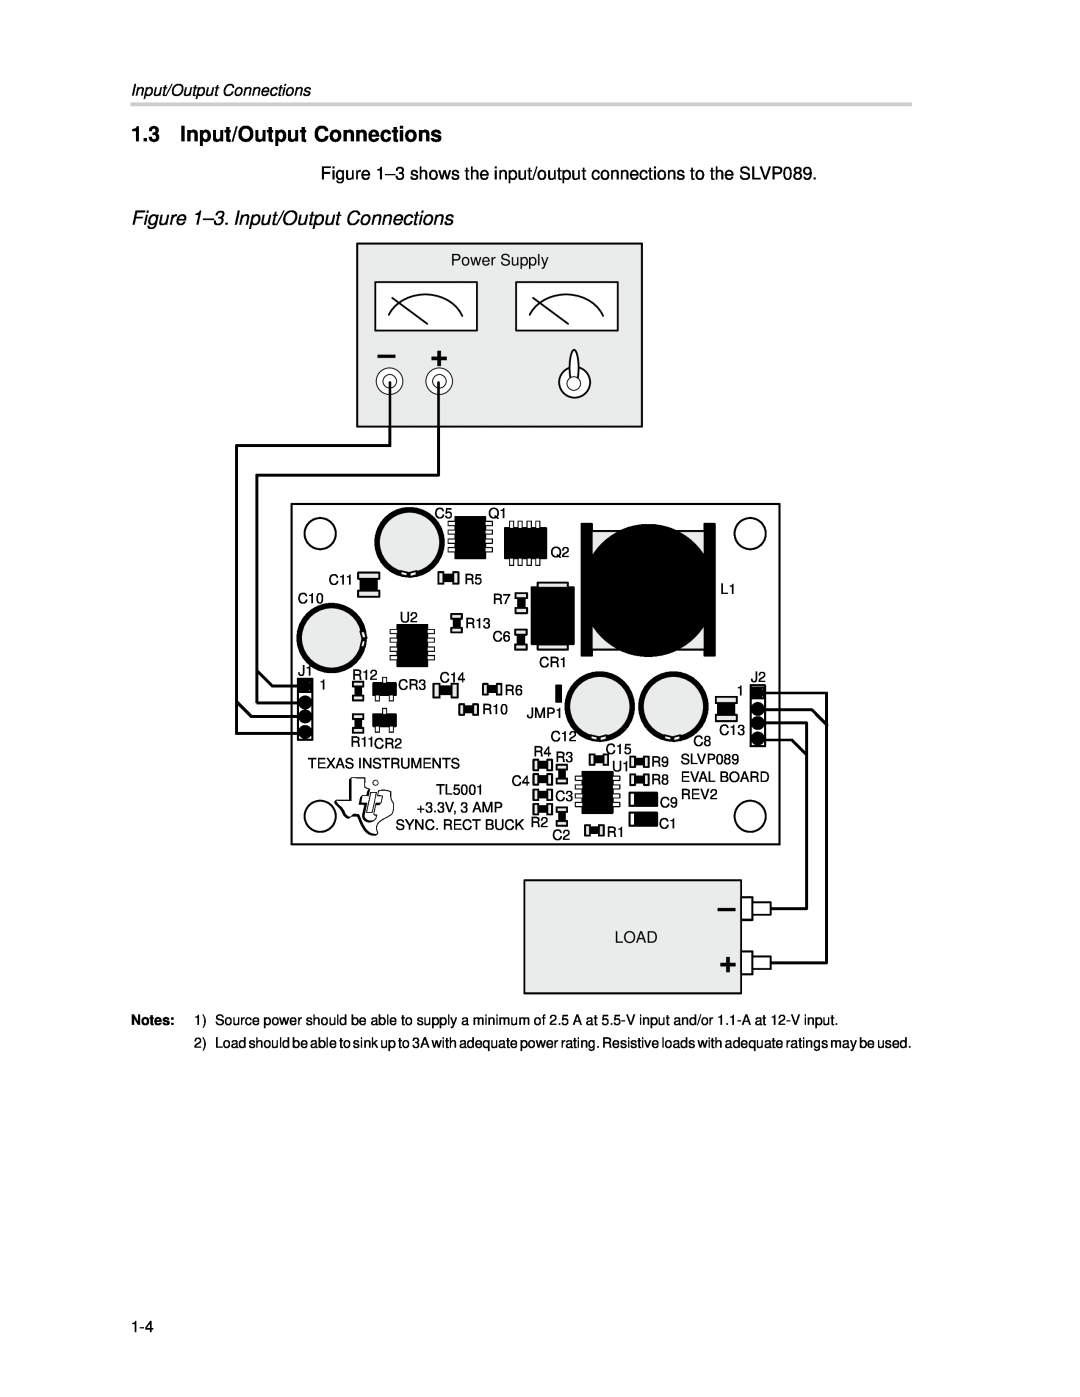 Texas Instruments SLVP089 manual 3. Input/Output Connections 